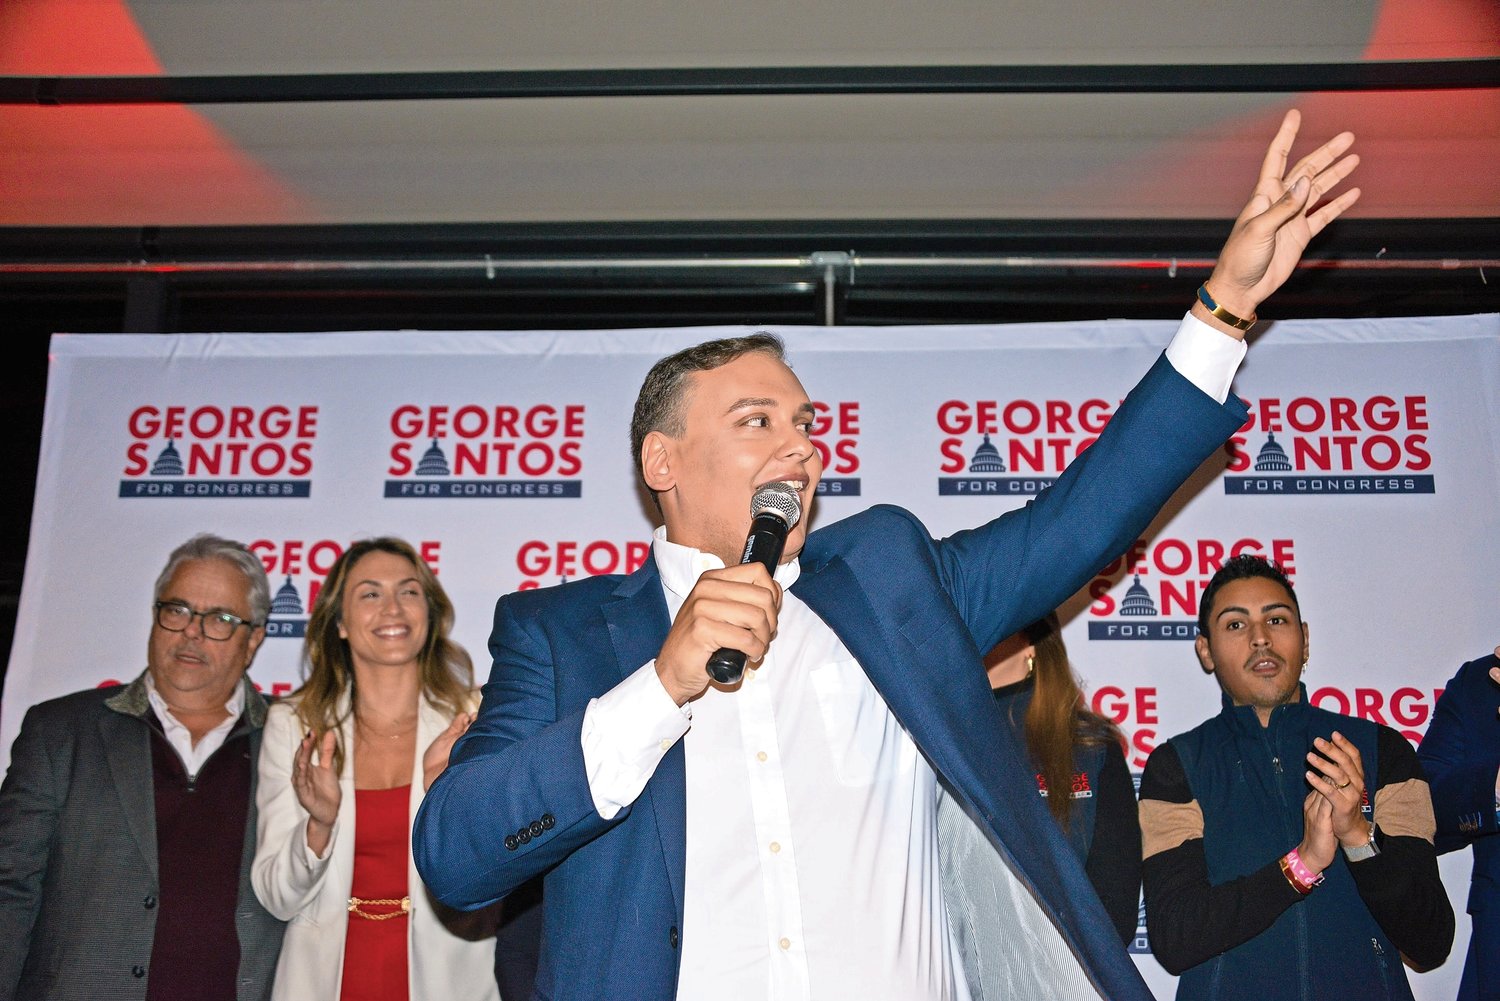 Rep. George Santos has filed for re-election in 2024 with the Federal Election Commission. This does not automatically mean he is running, but his recent statements indicate that it is likely he will.